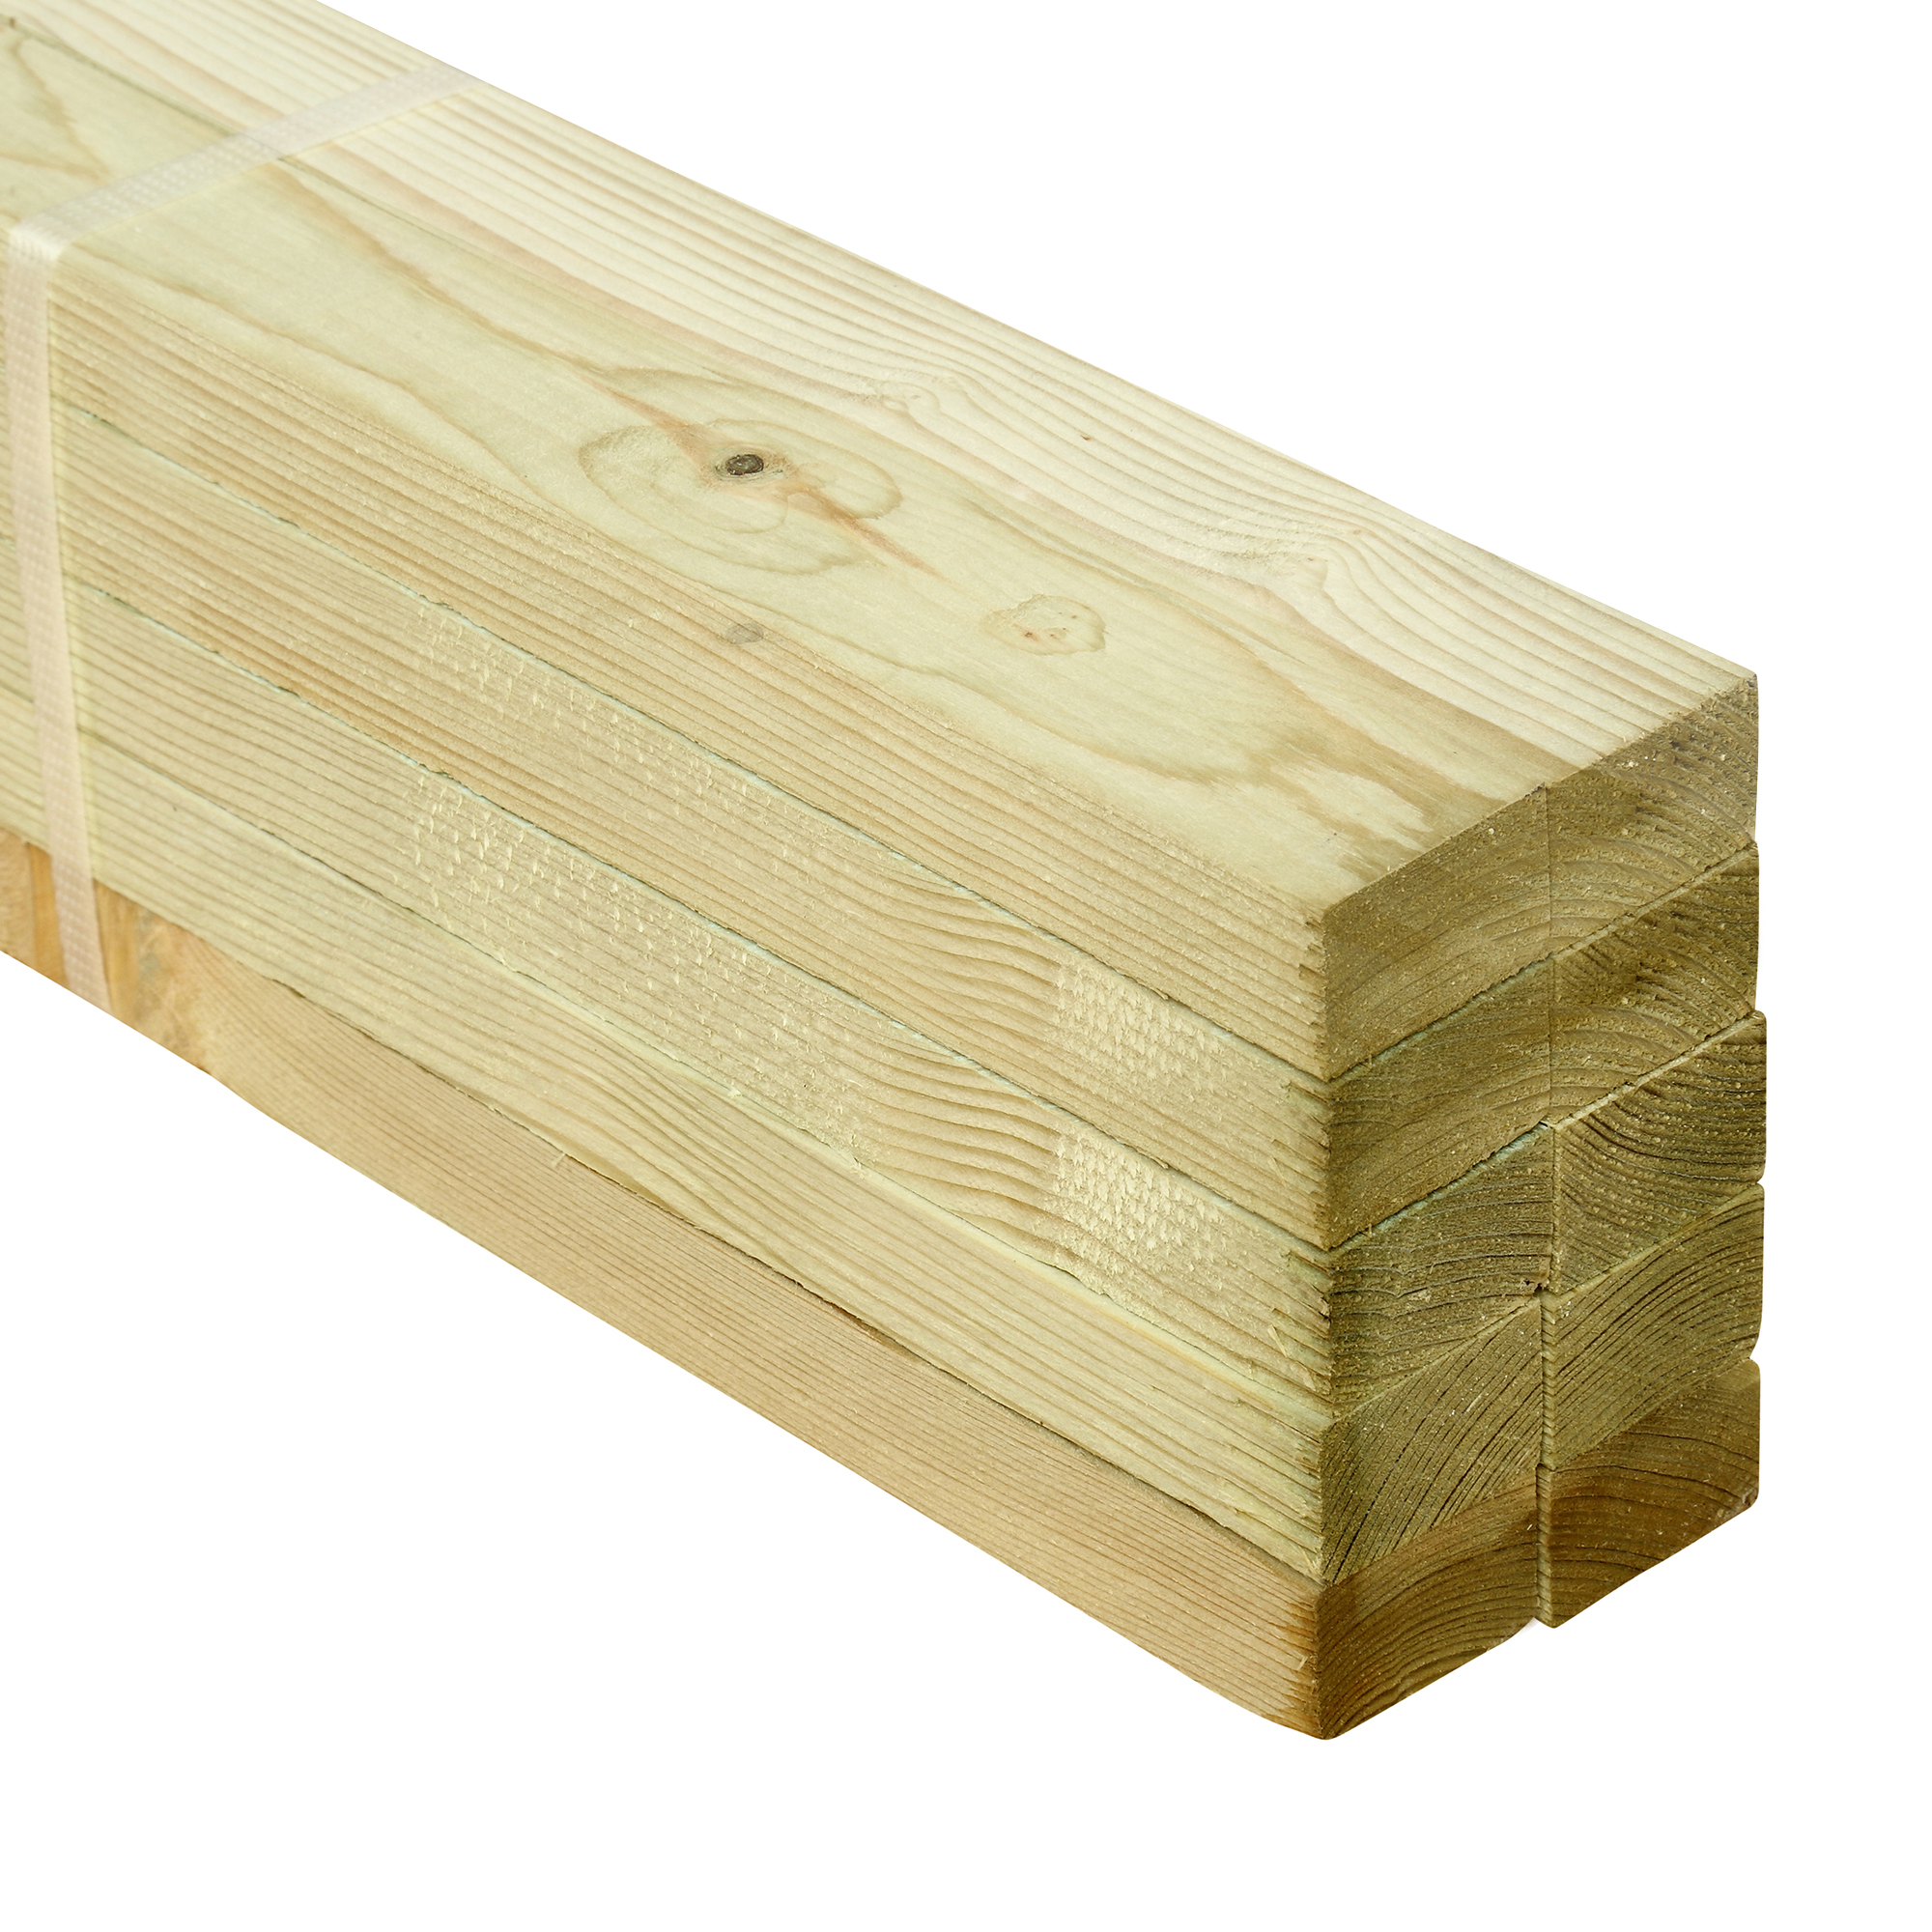 Image of Wickes Treated Sawn Timber - 19 x 38 x 2400mm - Pack 10